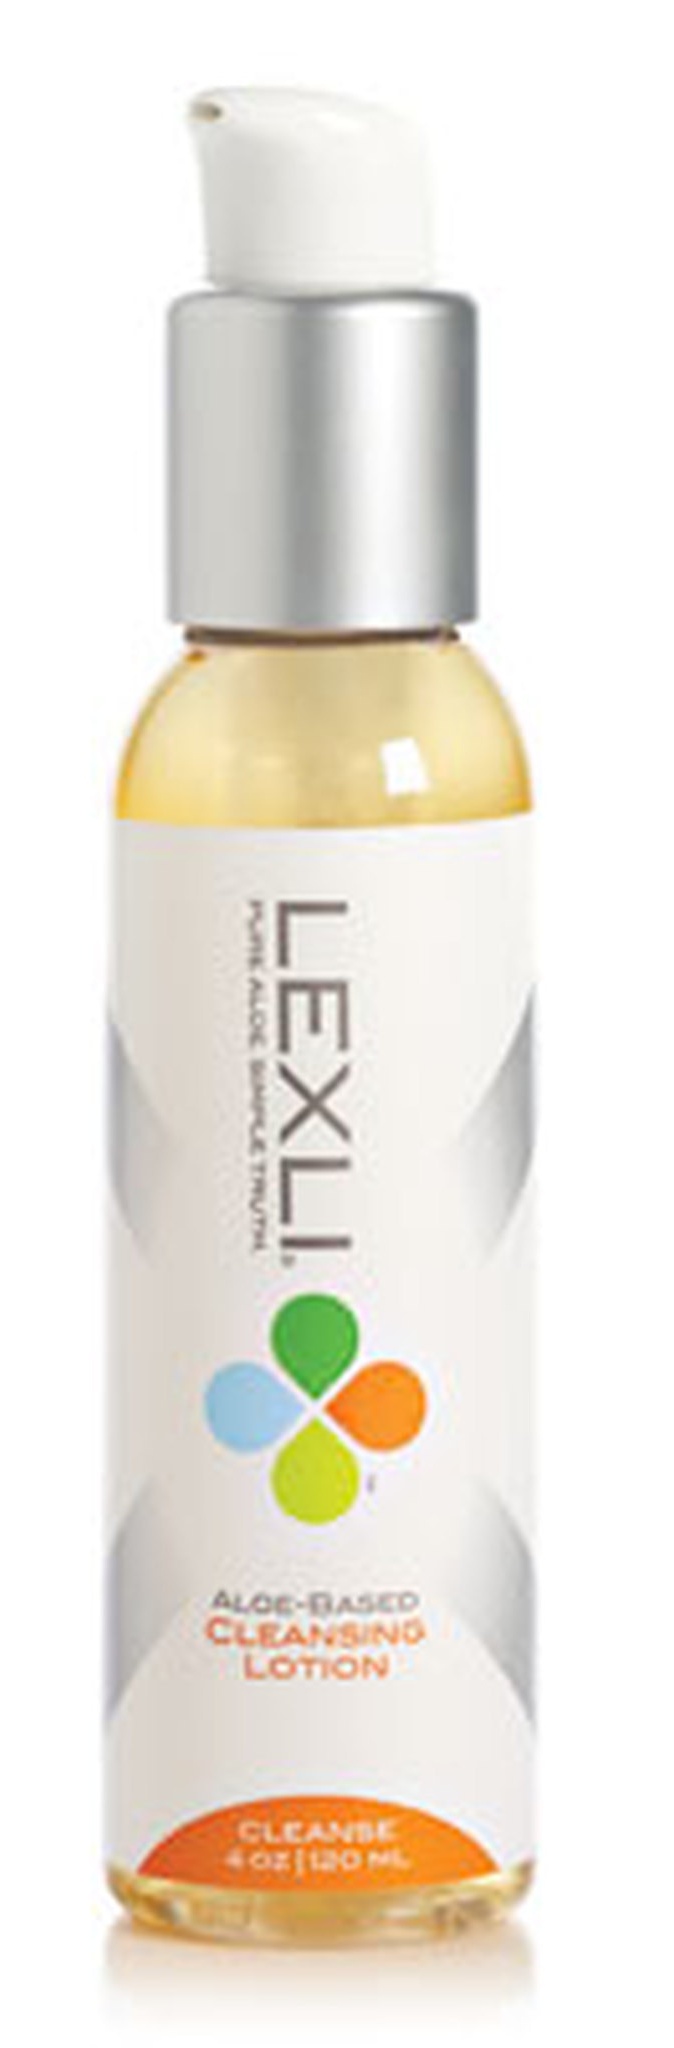 Lexli Cleansing Lotion